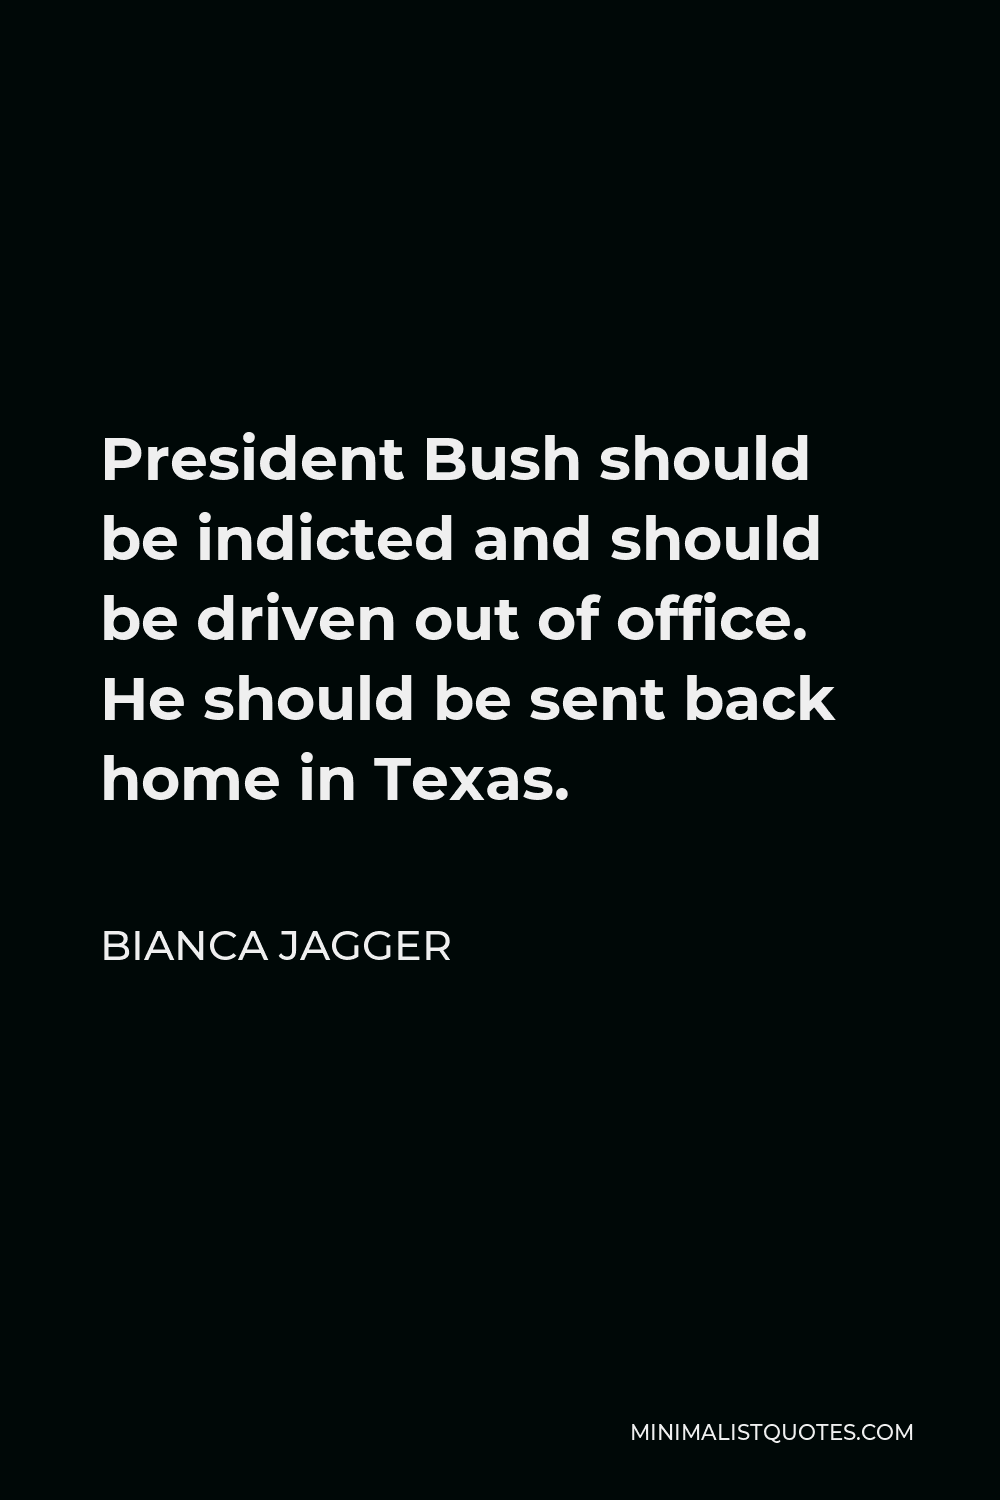 Bianca Jagger Quote - President Bush should be indicted and should be driven out of office. He should be sent back home in Texas.